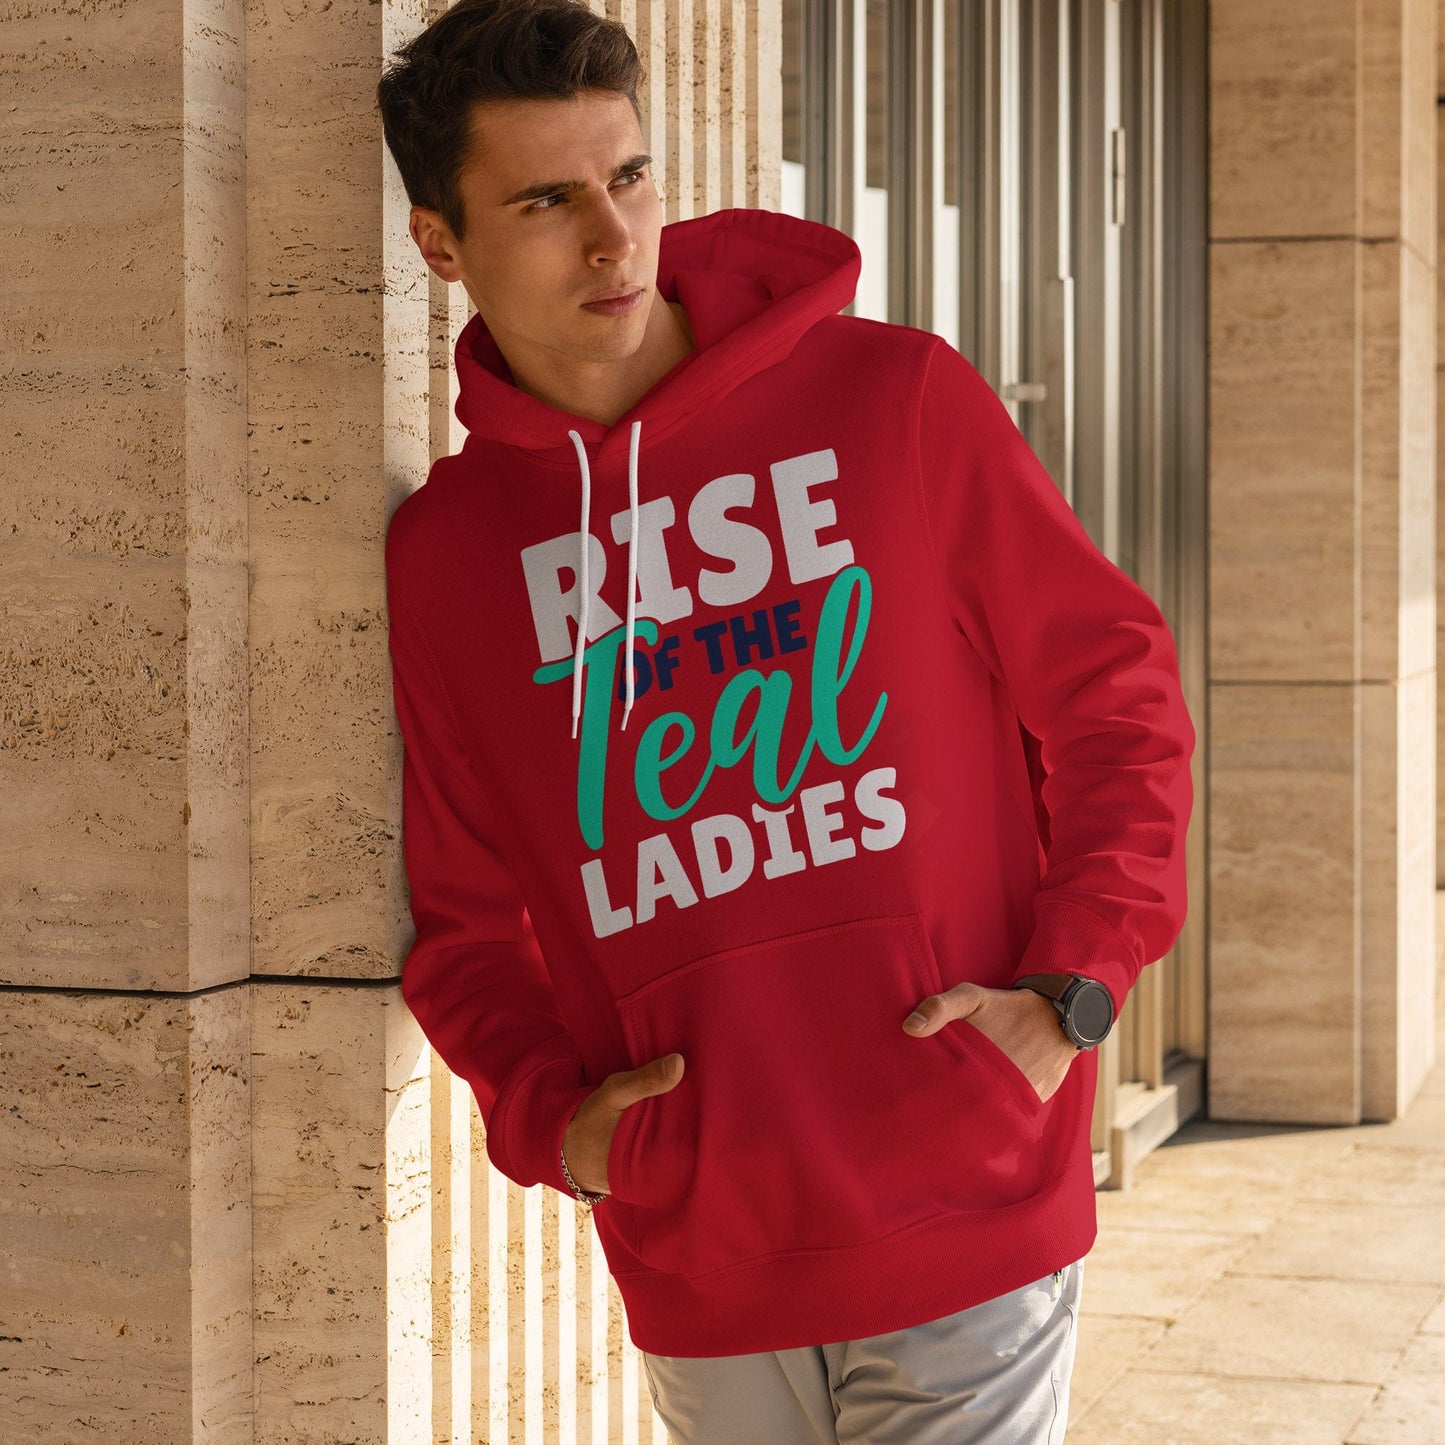 KC Swag Kansas City Current TEAL LADIES RISE on red fleece pullover hoodie worn by male model leaning against a stone wall in outdoor plaza